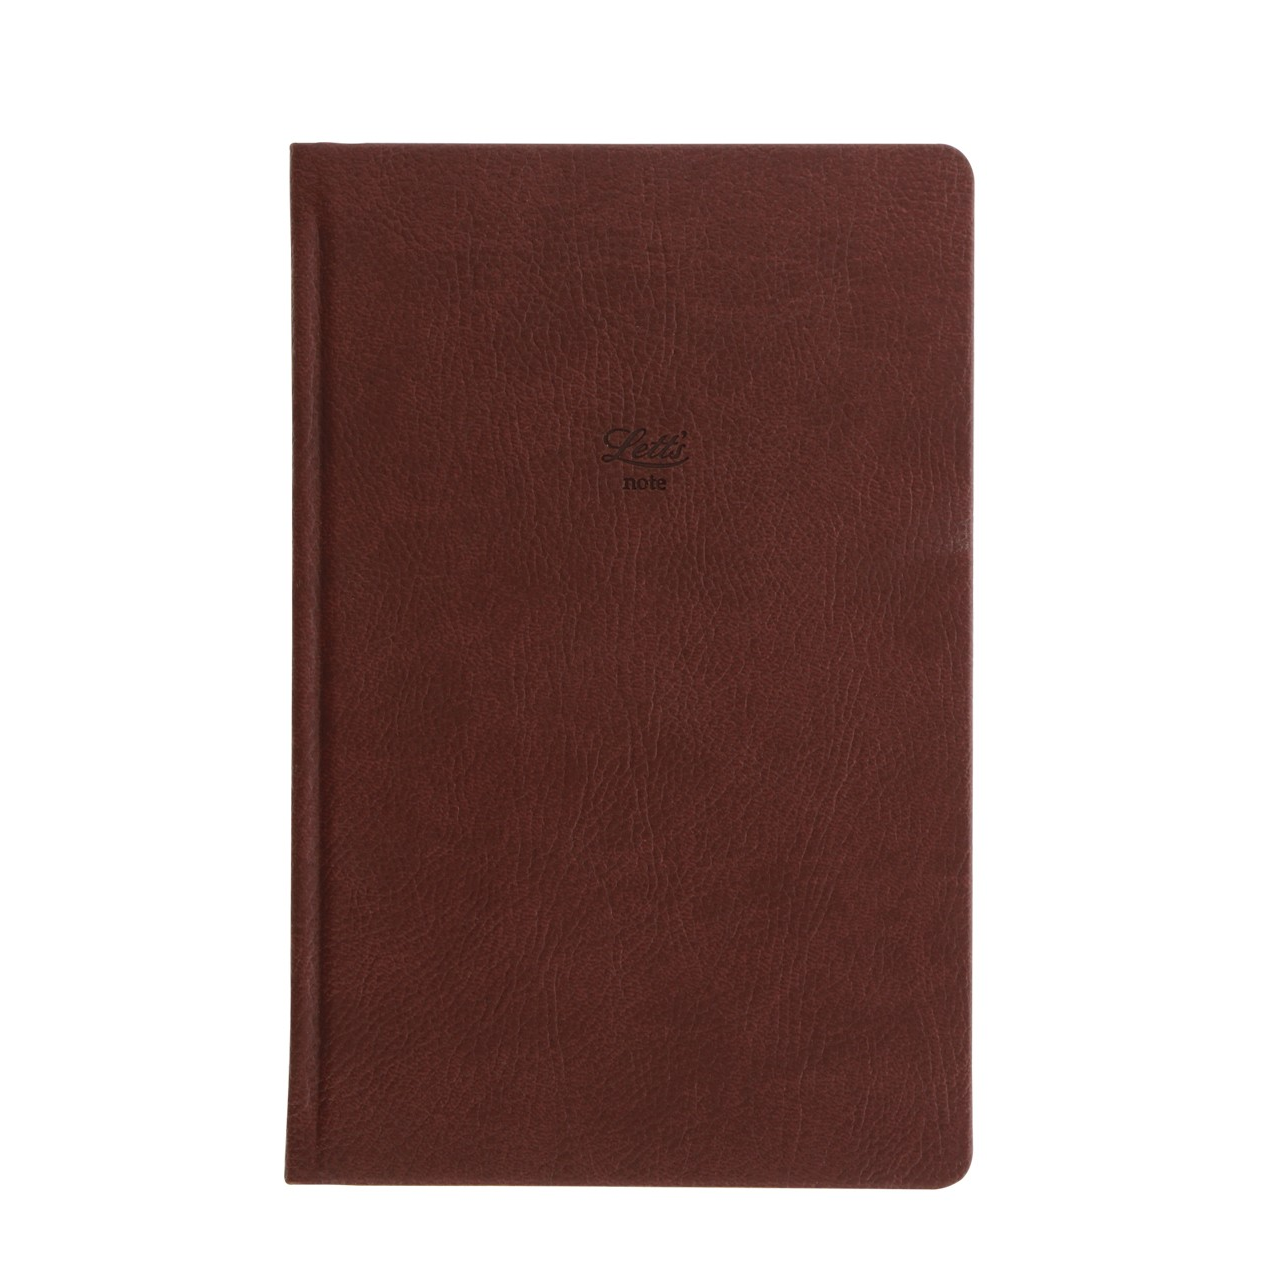 Letts Origins Hardcover Notebook - 5 1/8" x 7 7/8" - Ruled - Chocolate | Atlas Stationers.